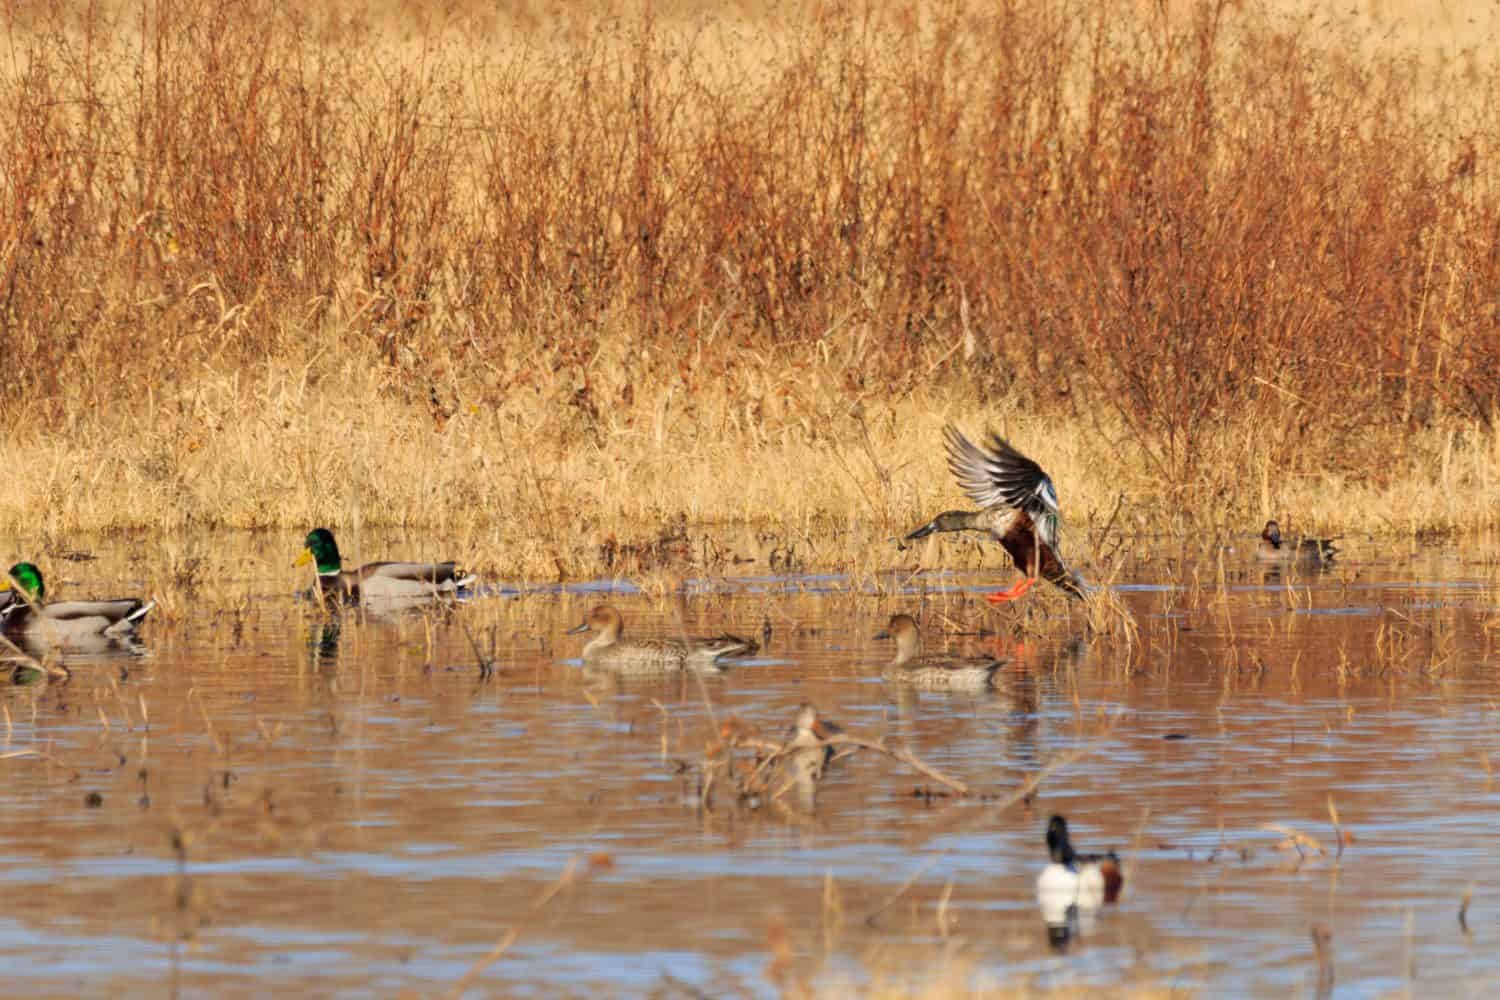 A group of male and female Mallard Ducks frolicking around in the wetlands of the Salt Plains National Wildlife Refuge located in Jet, Oklahoma 2017